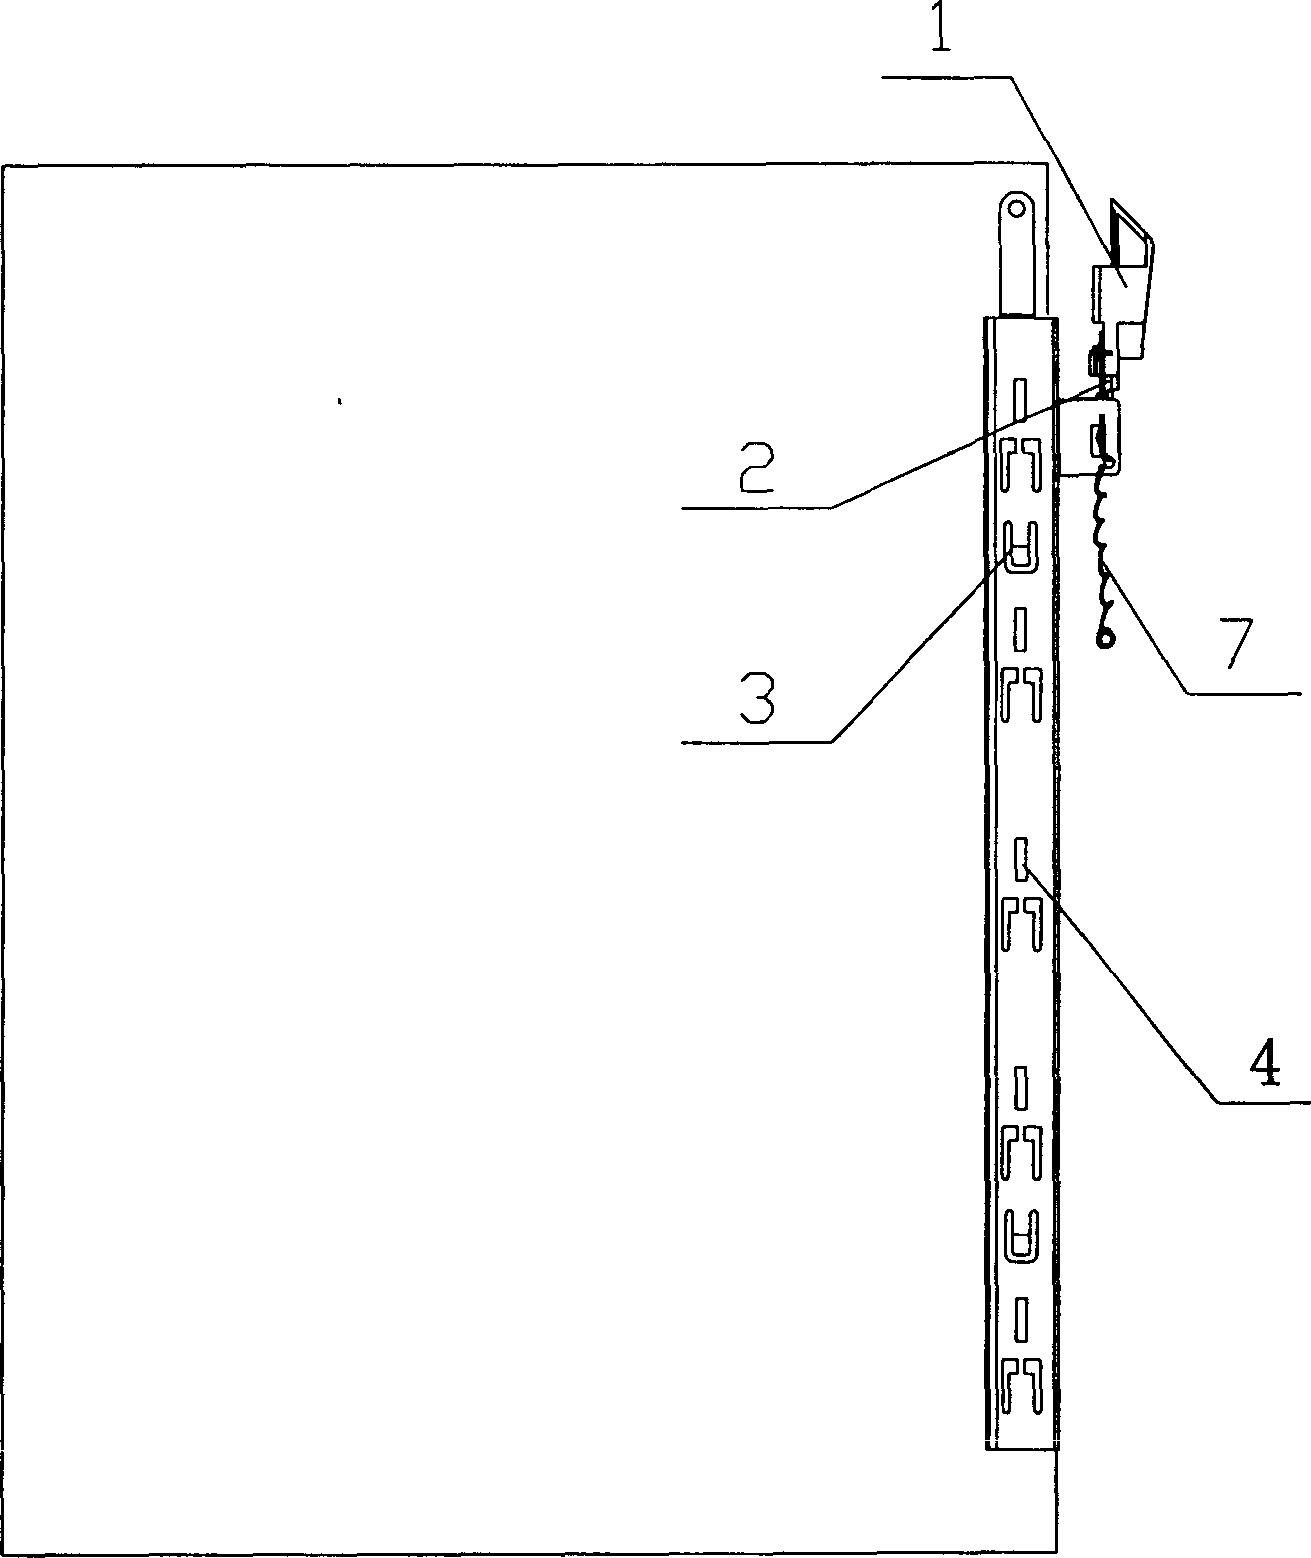 One key opened computer host casing structure